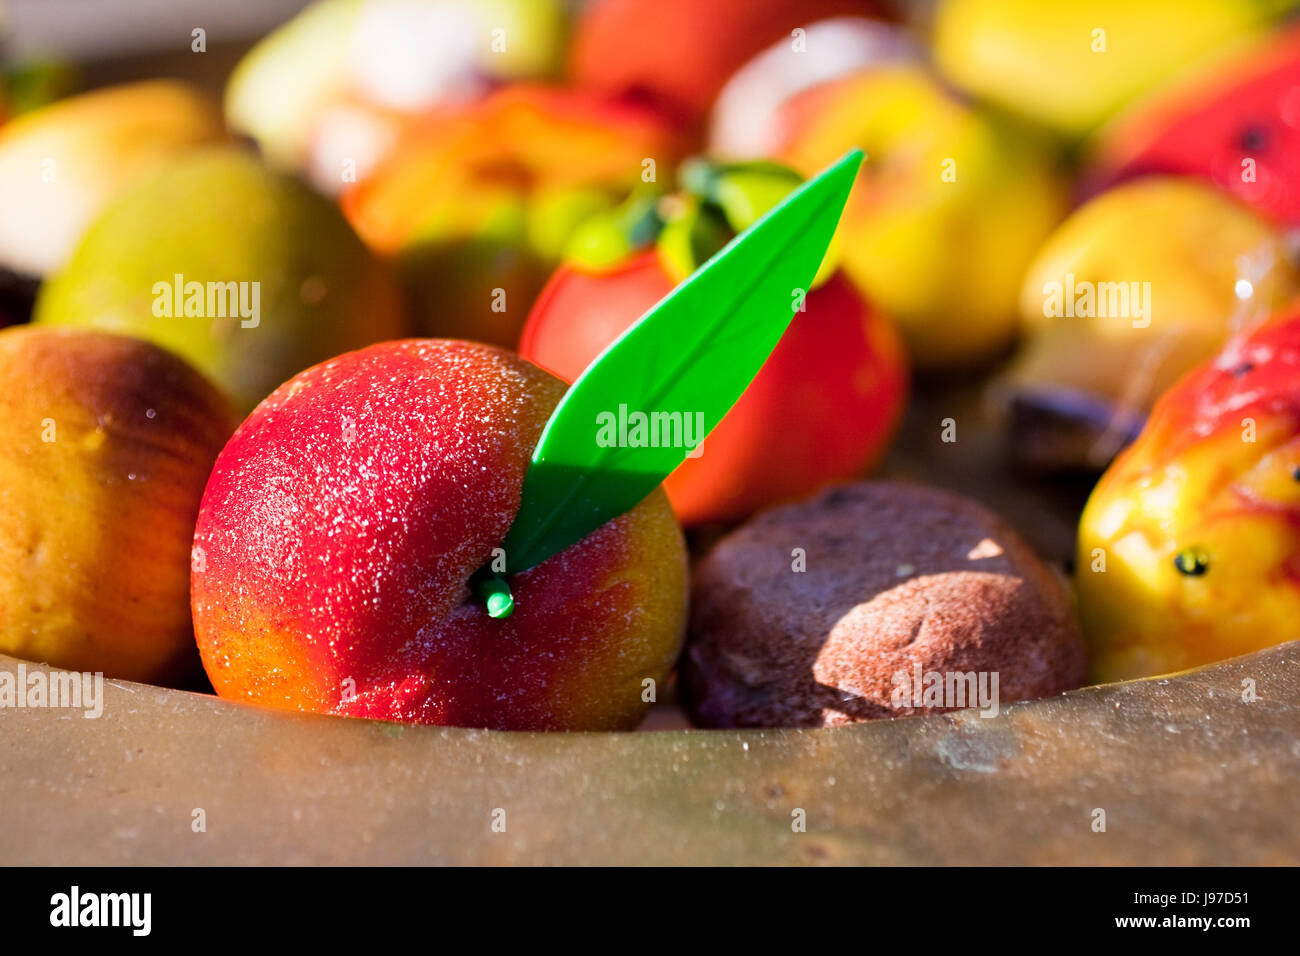 sweet, sicily, food, aliment, sweet, sweets, gastronomy, progenies, fruits, Stock Photo